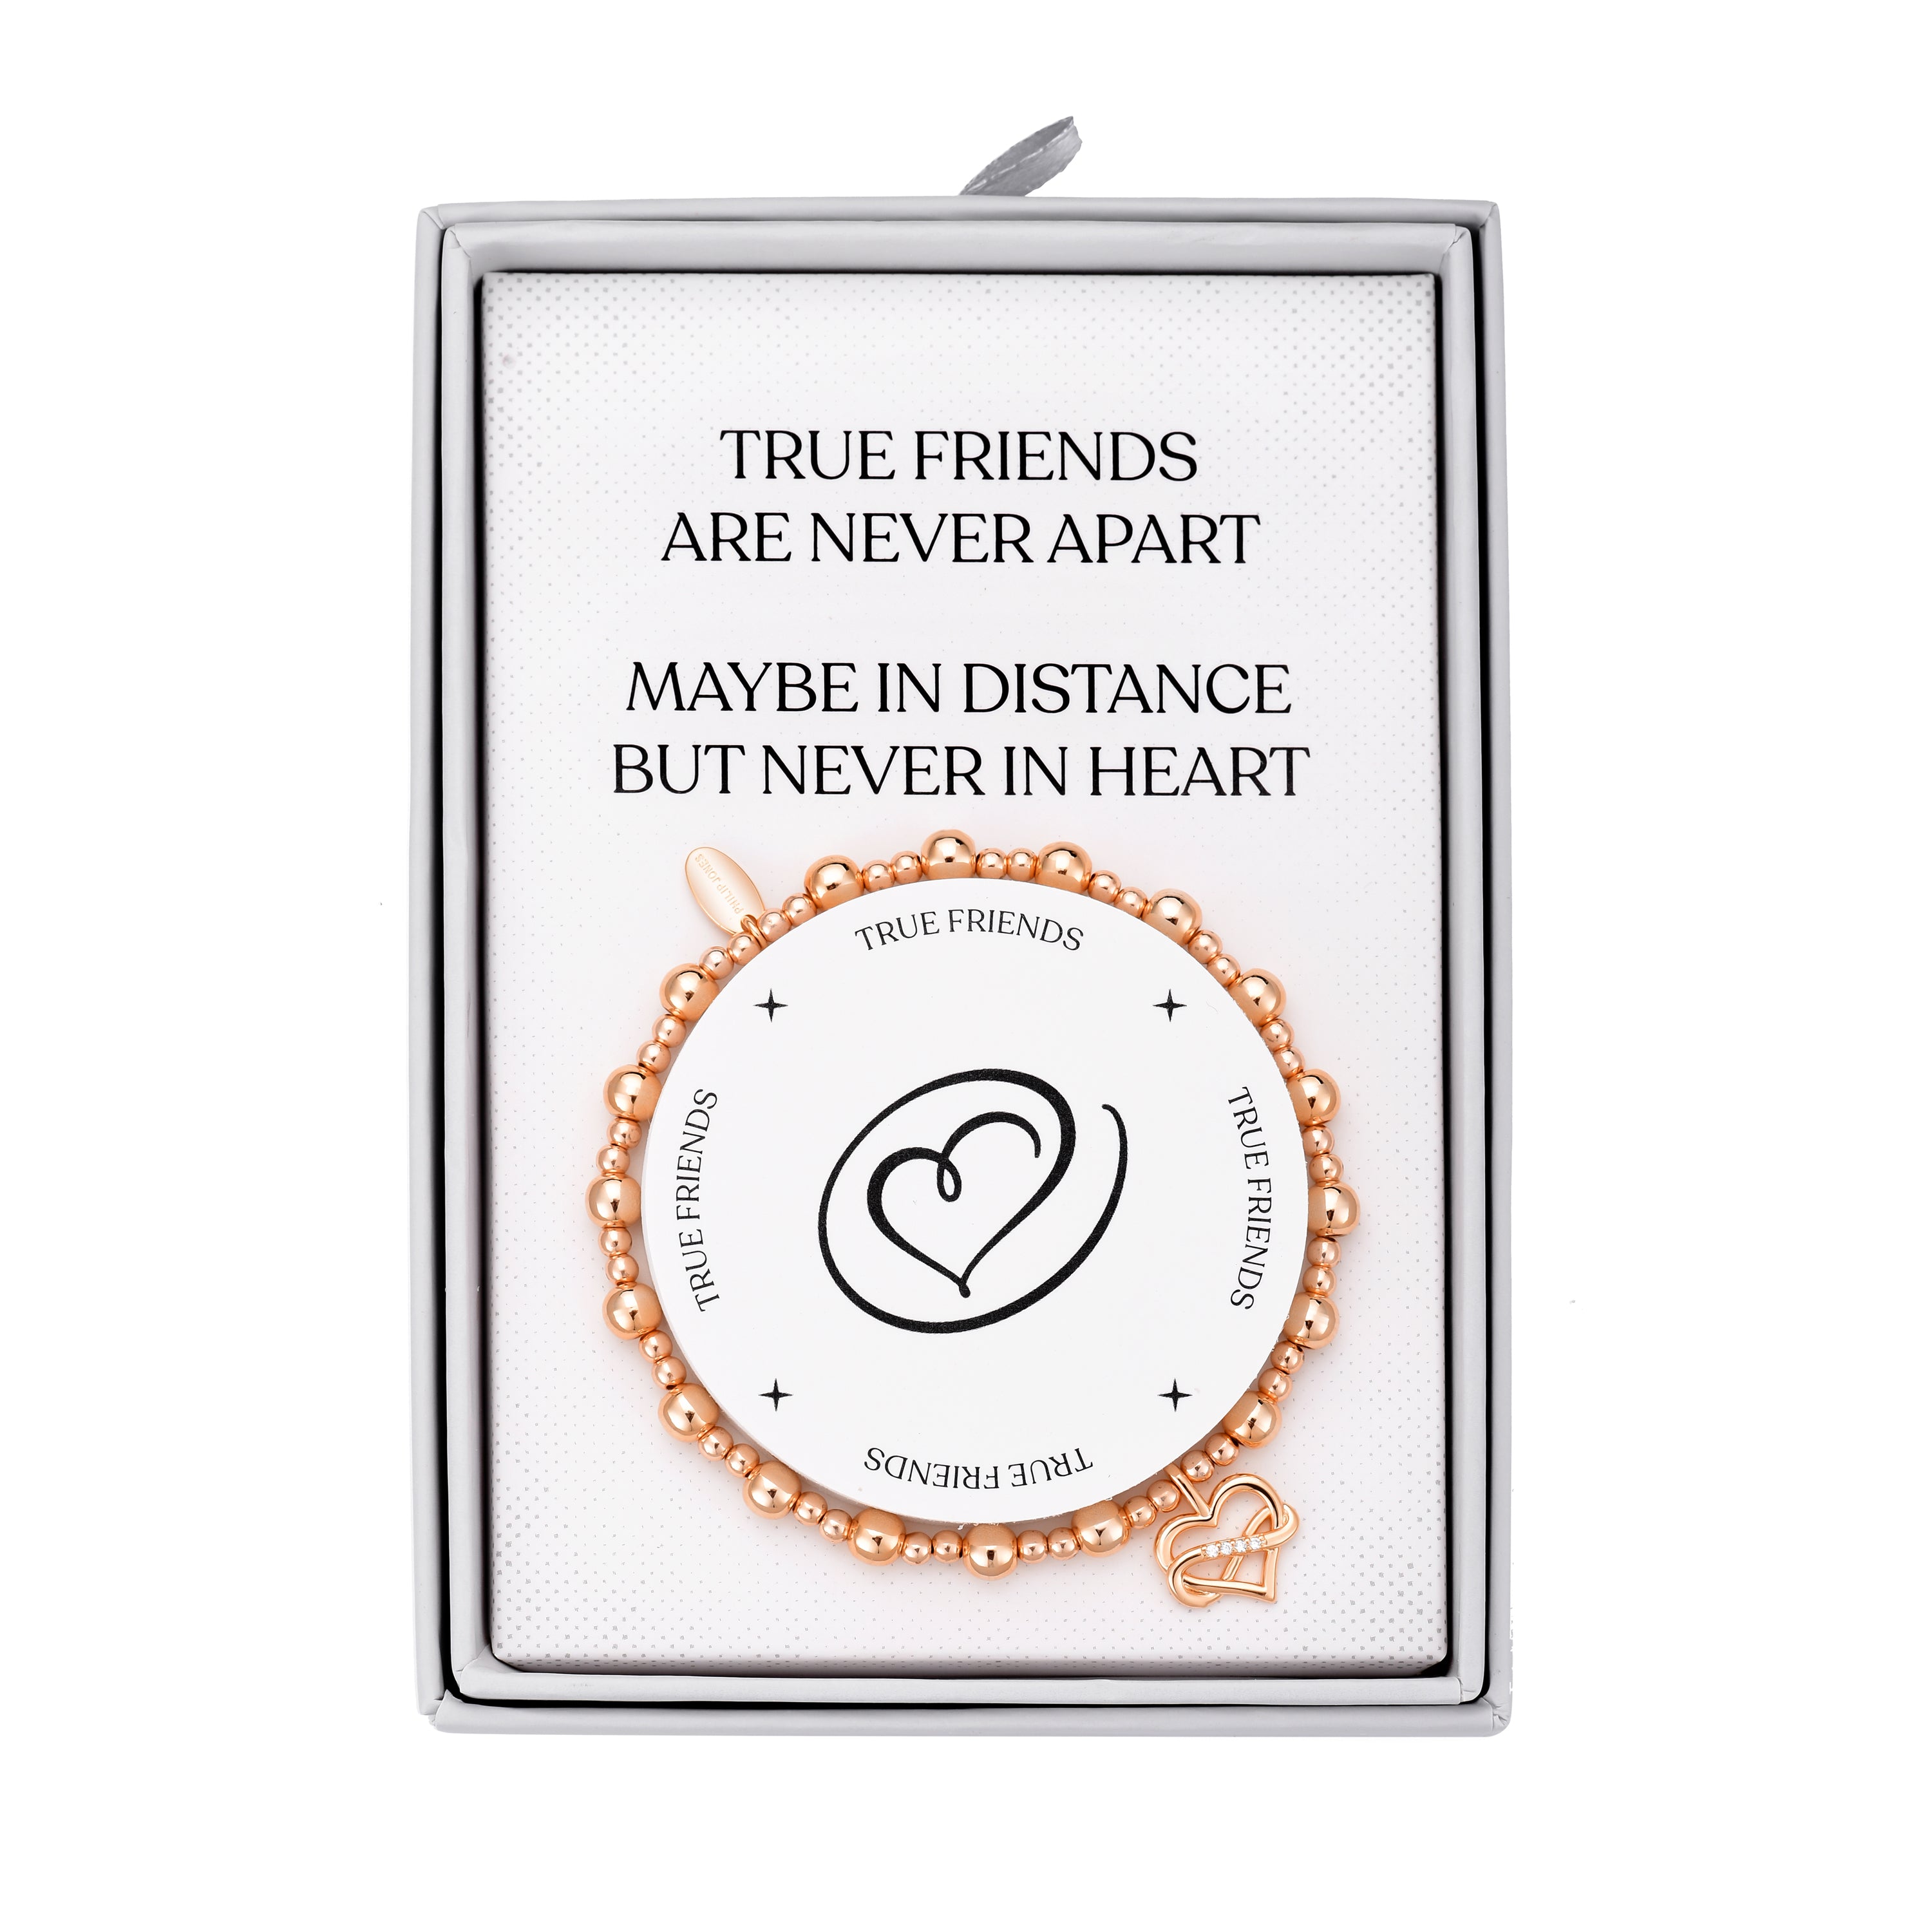 Rose Gold Plated True Friends Quote Stretch Bracelet with Gift Box by Philip Jones Jewellery